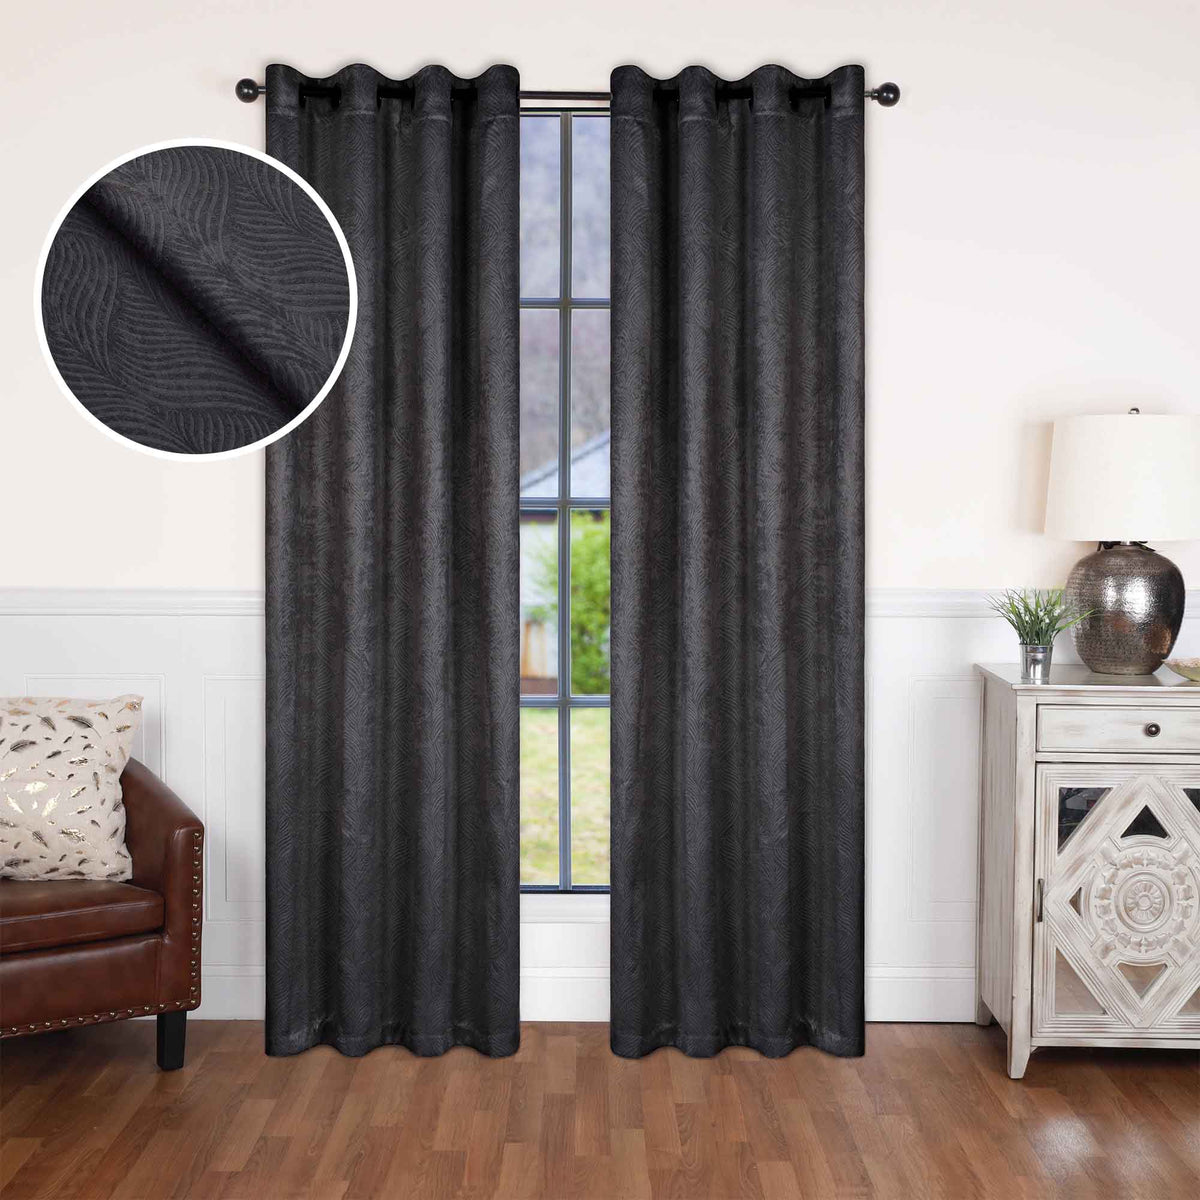 Waverly Thermal Blackout Grommet 2 Piece Curtain Panel Set - Gray